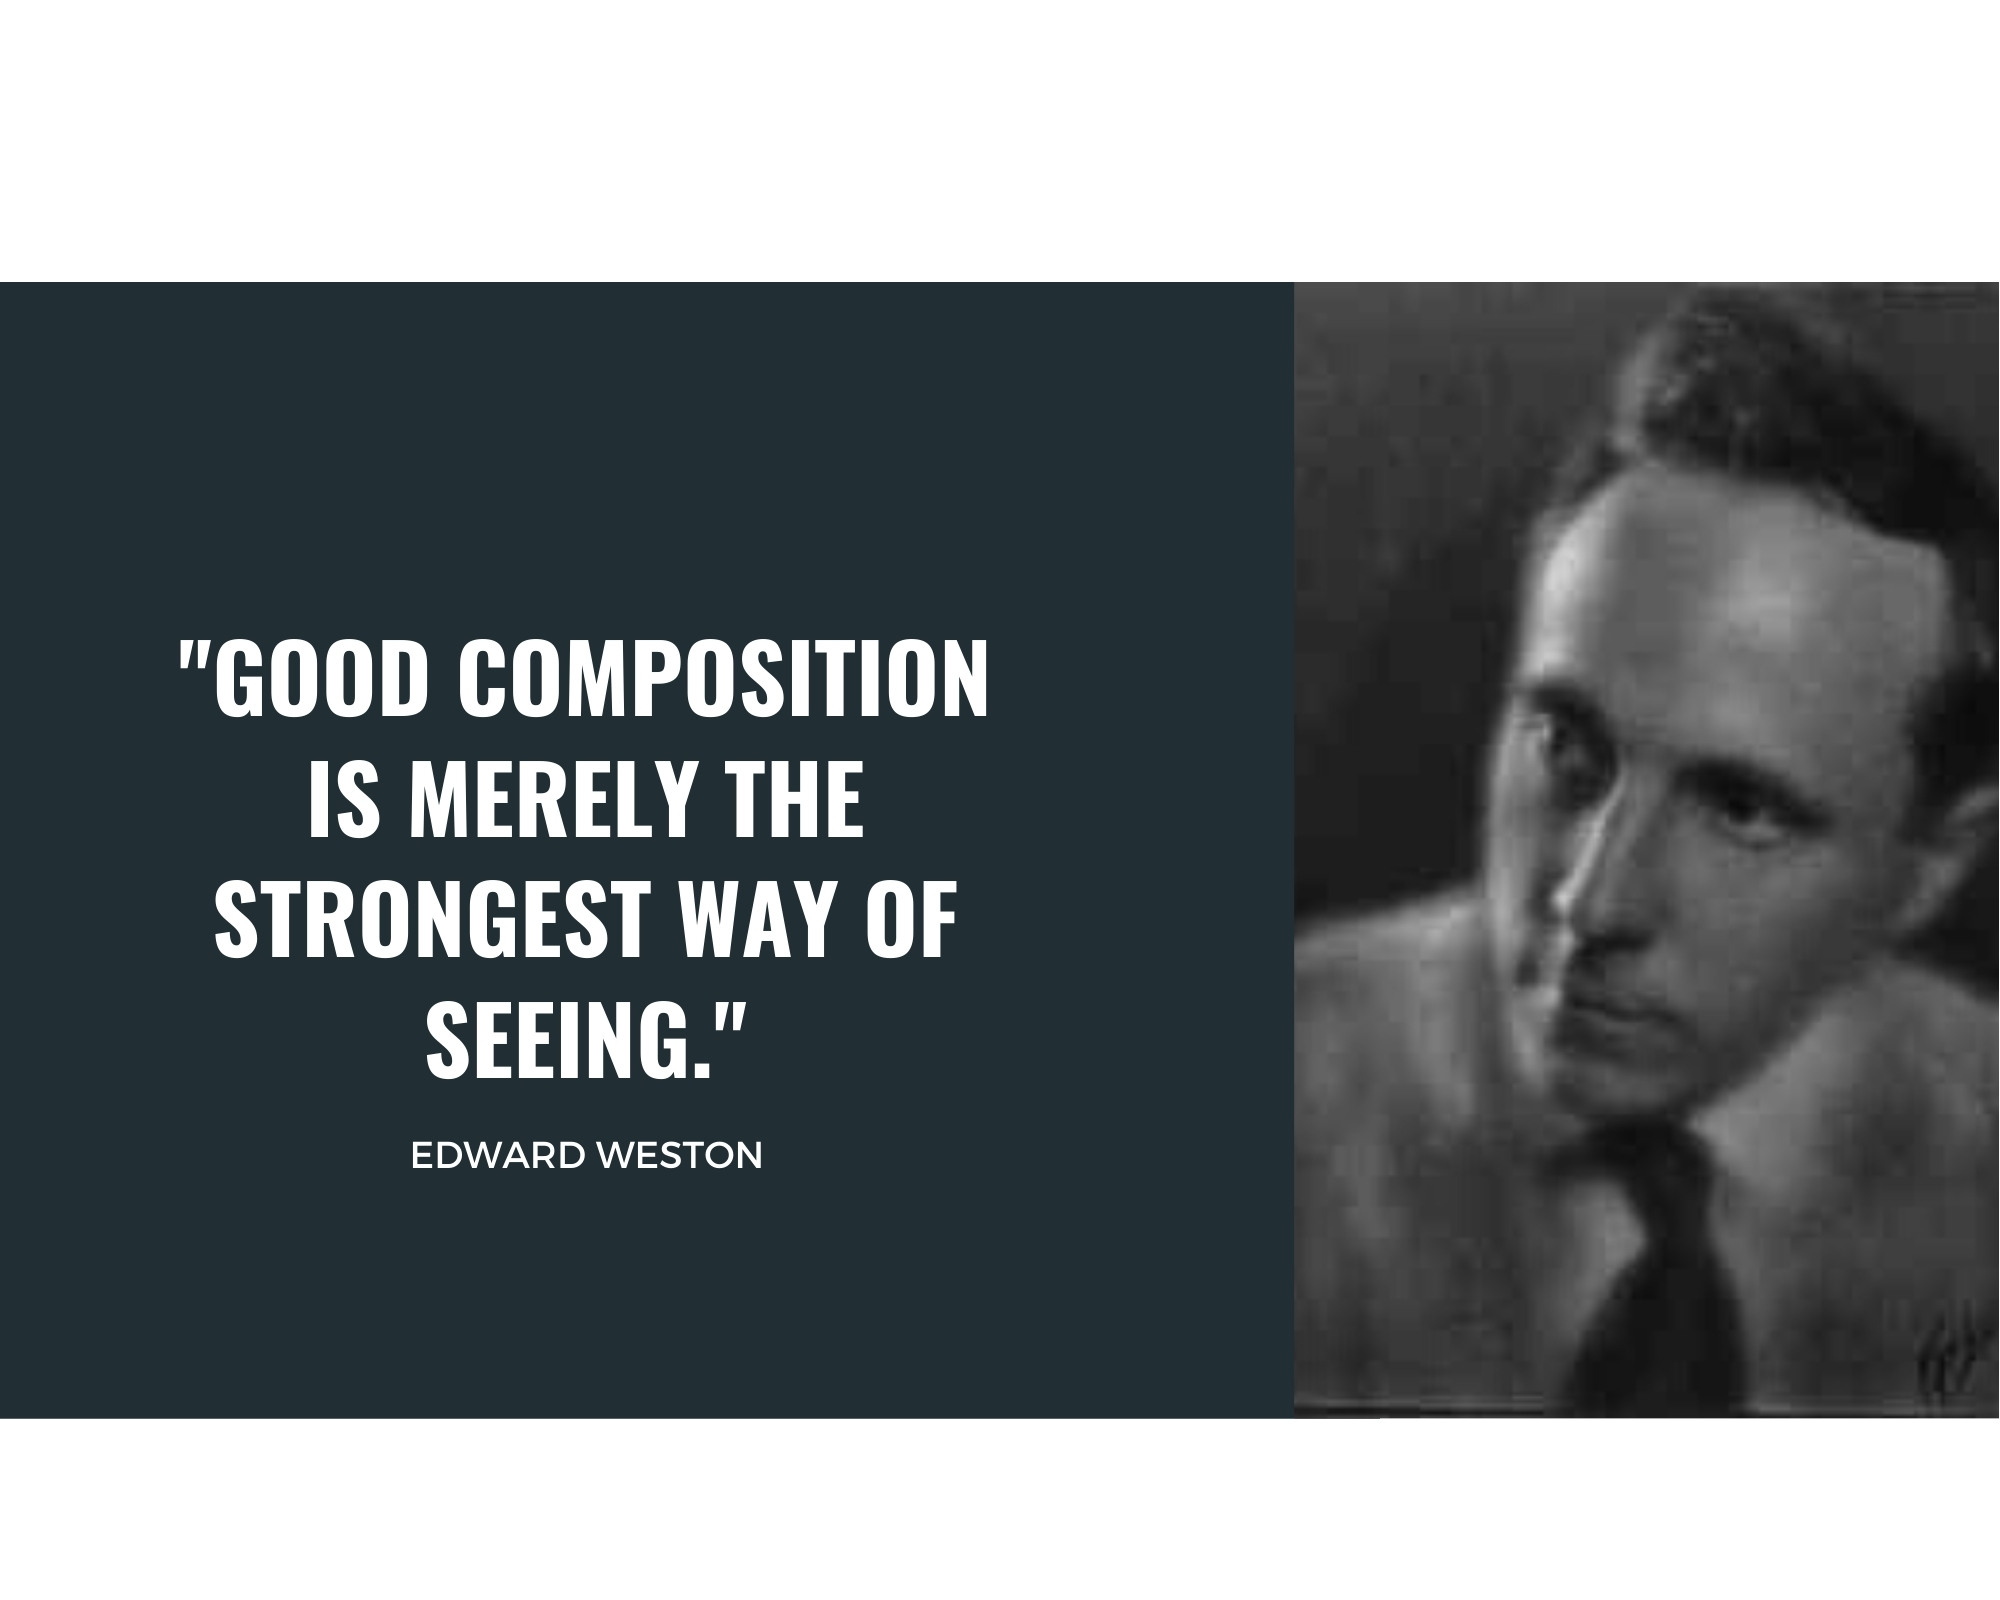 Good-composition-is-merely-the-strongest-way-of-seeing